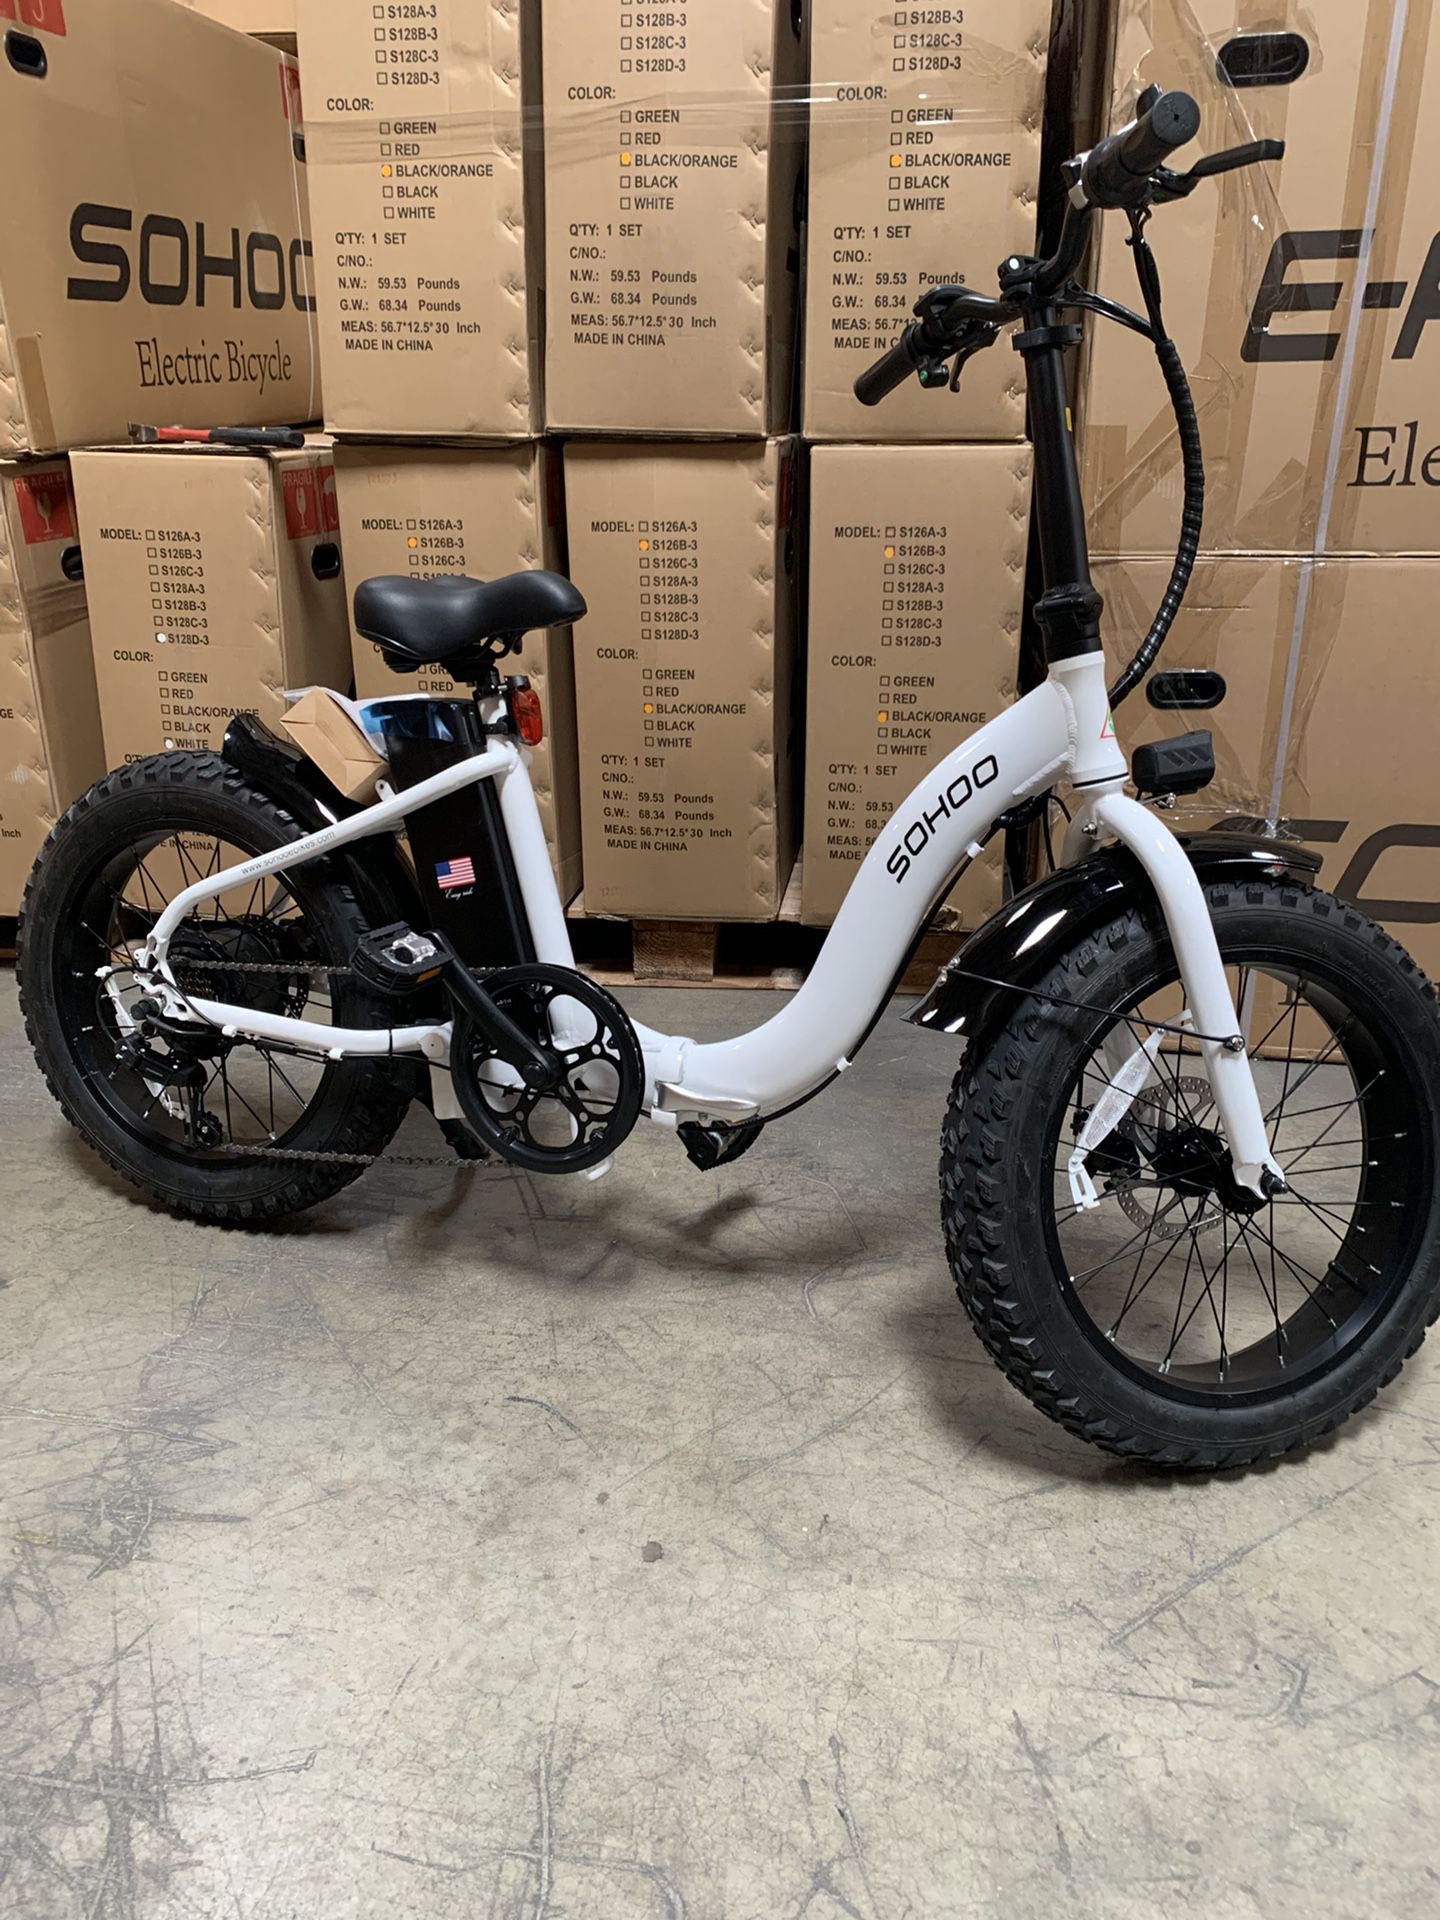 Amazing Electric Bicycles On ISale, 10+ Models, Used&New $749-$1549